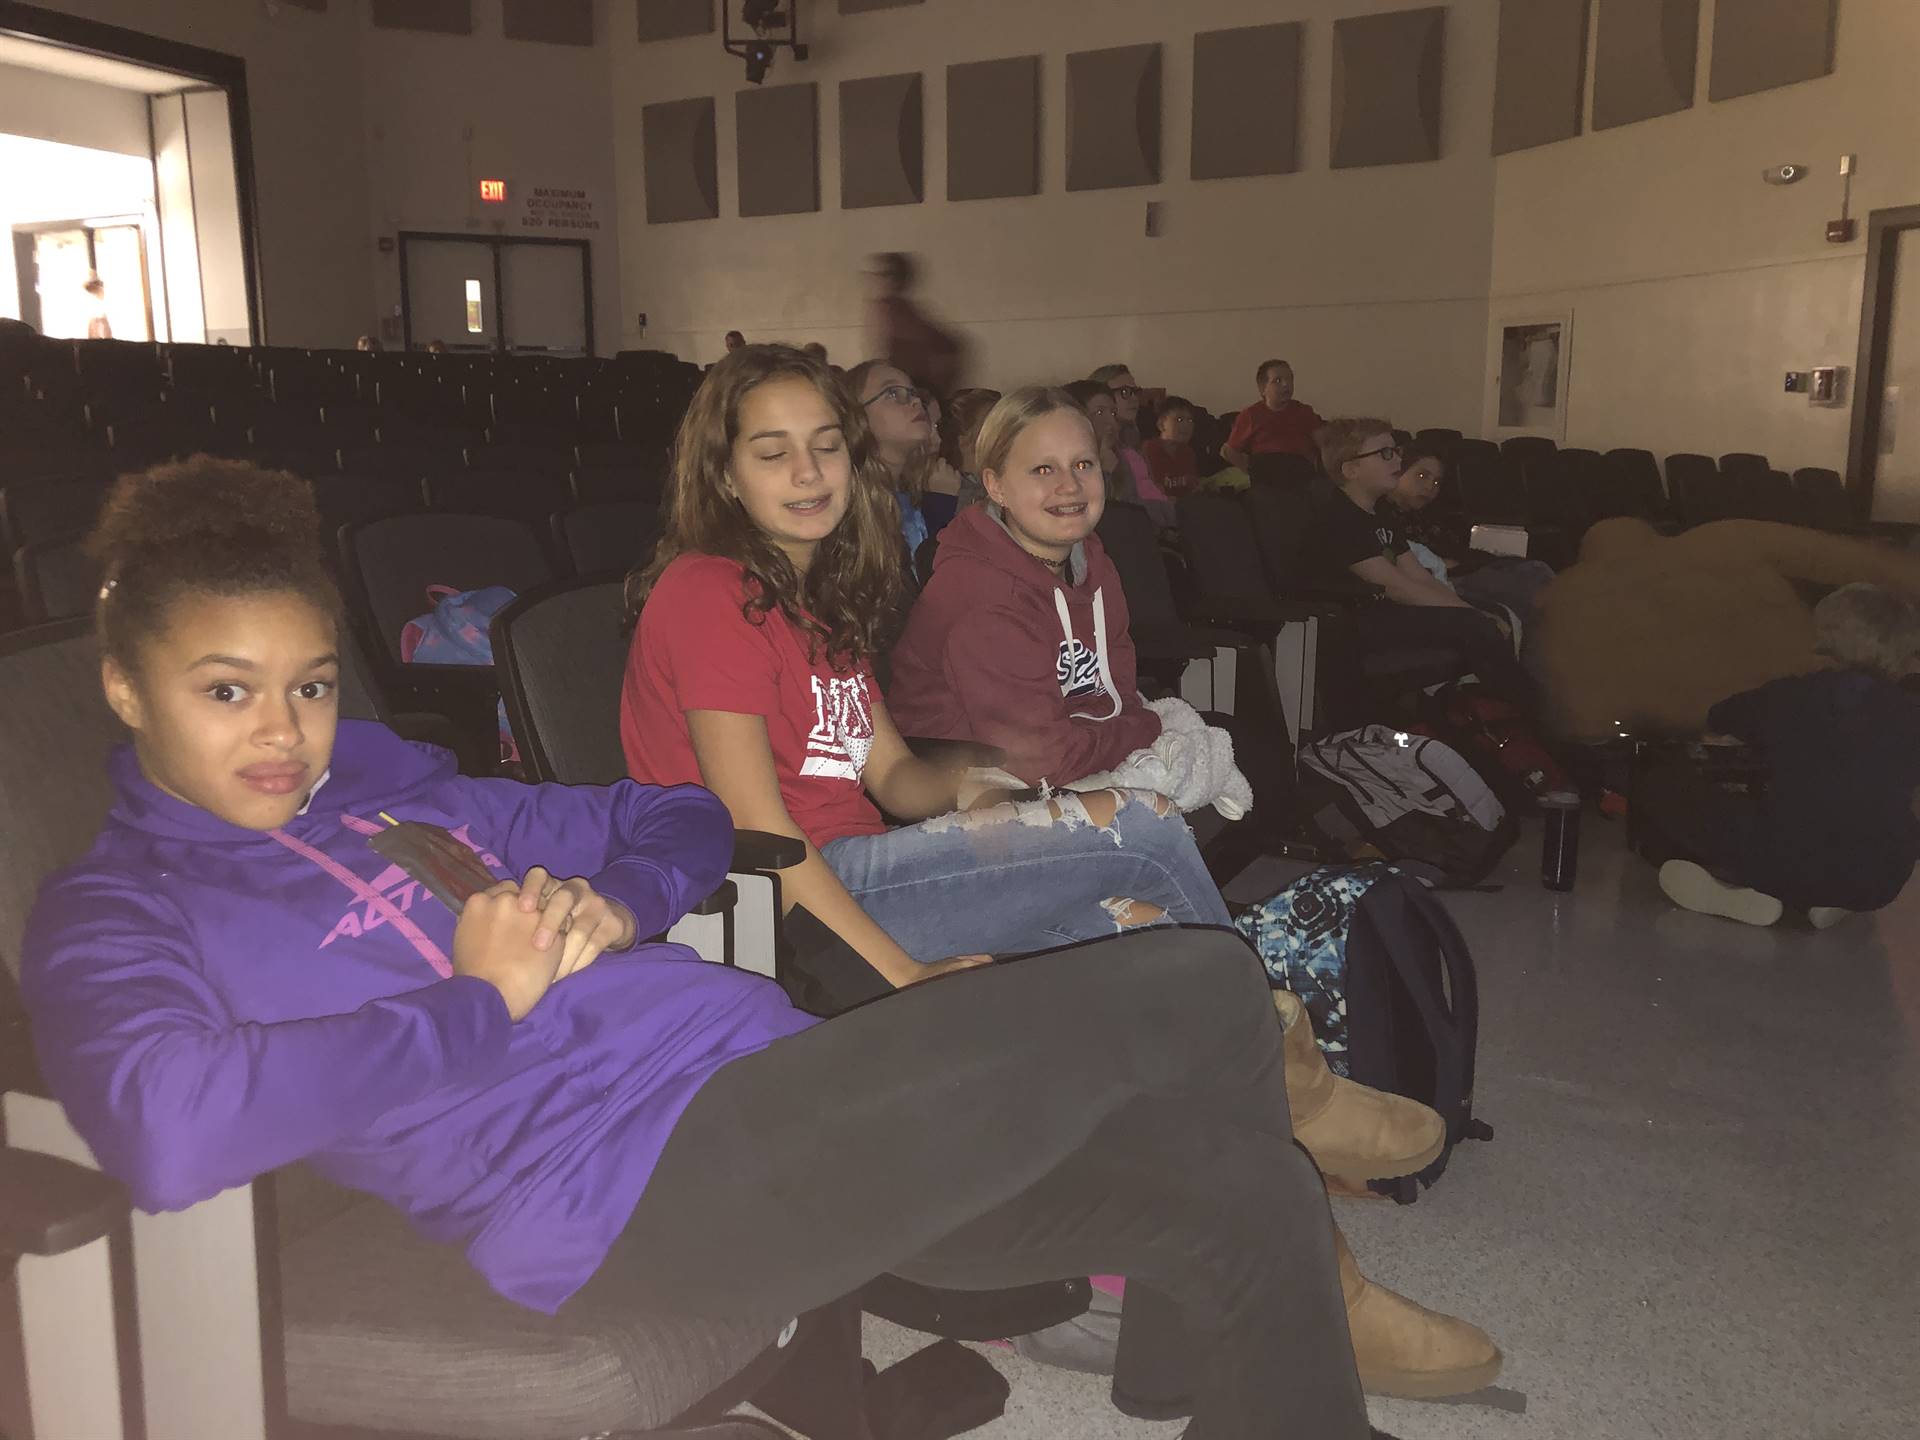 A group of middle school students sitting in auditorium seats